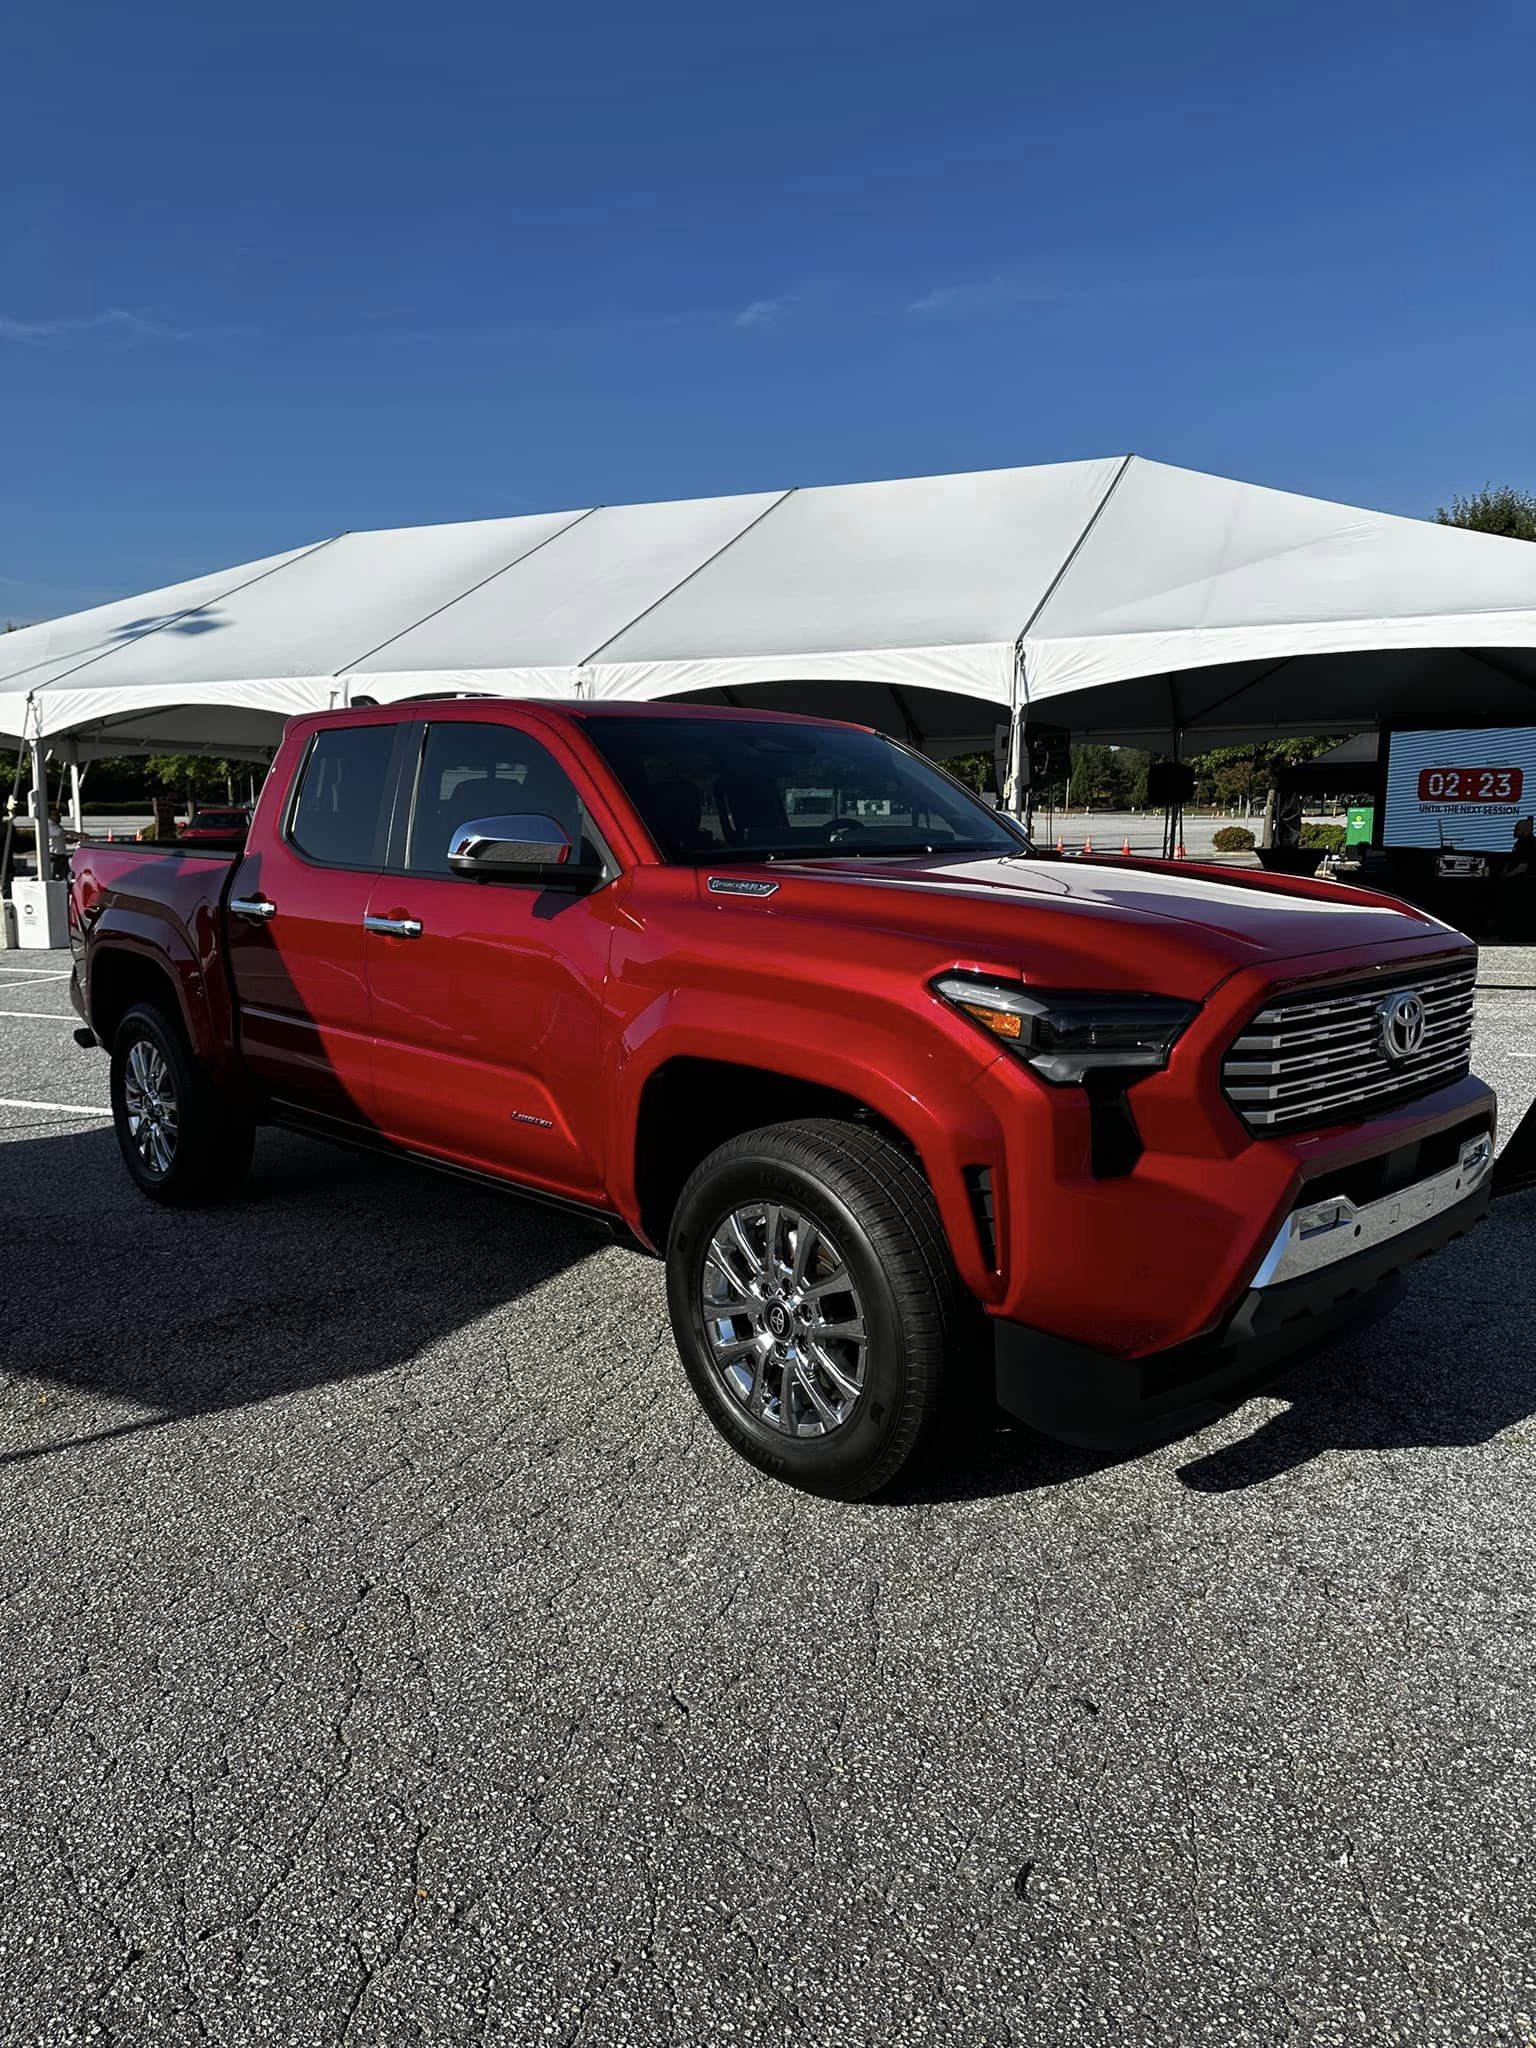 2024 Tacoma Official SUPERSONIC RED 2024 Tacoma Thread (4th Gen) 387094402_6600156486748312_539696176559306452_n